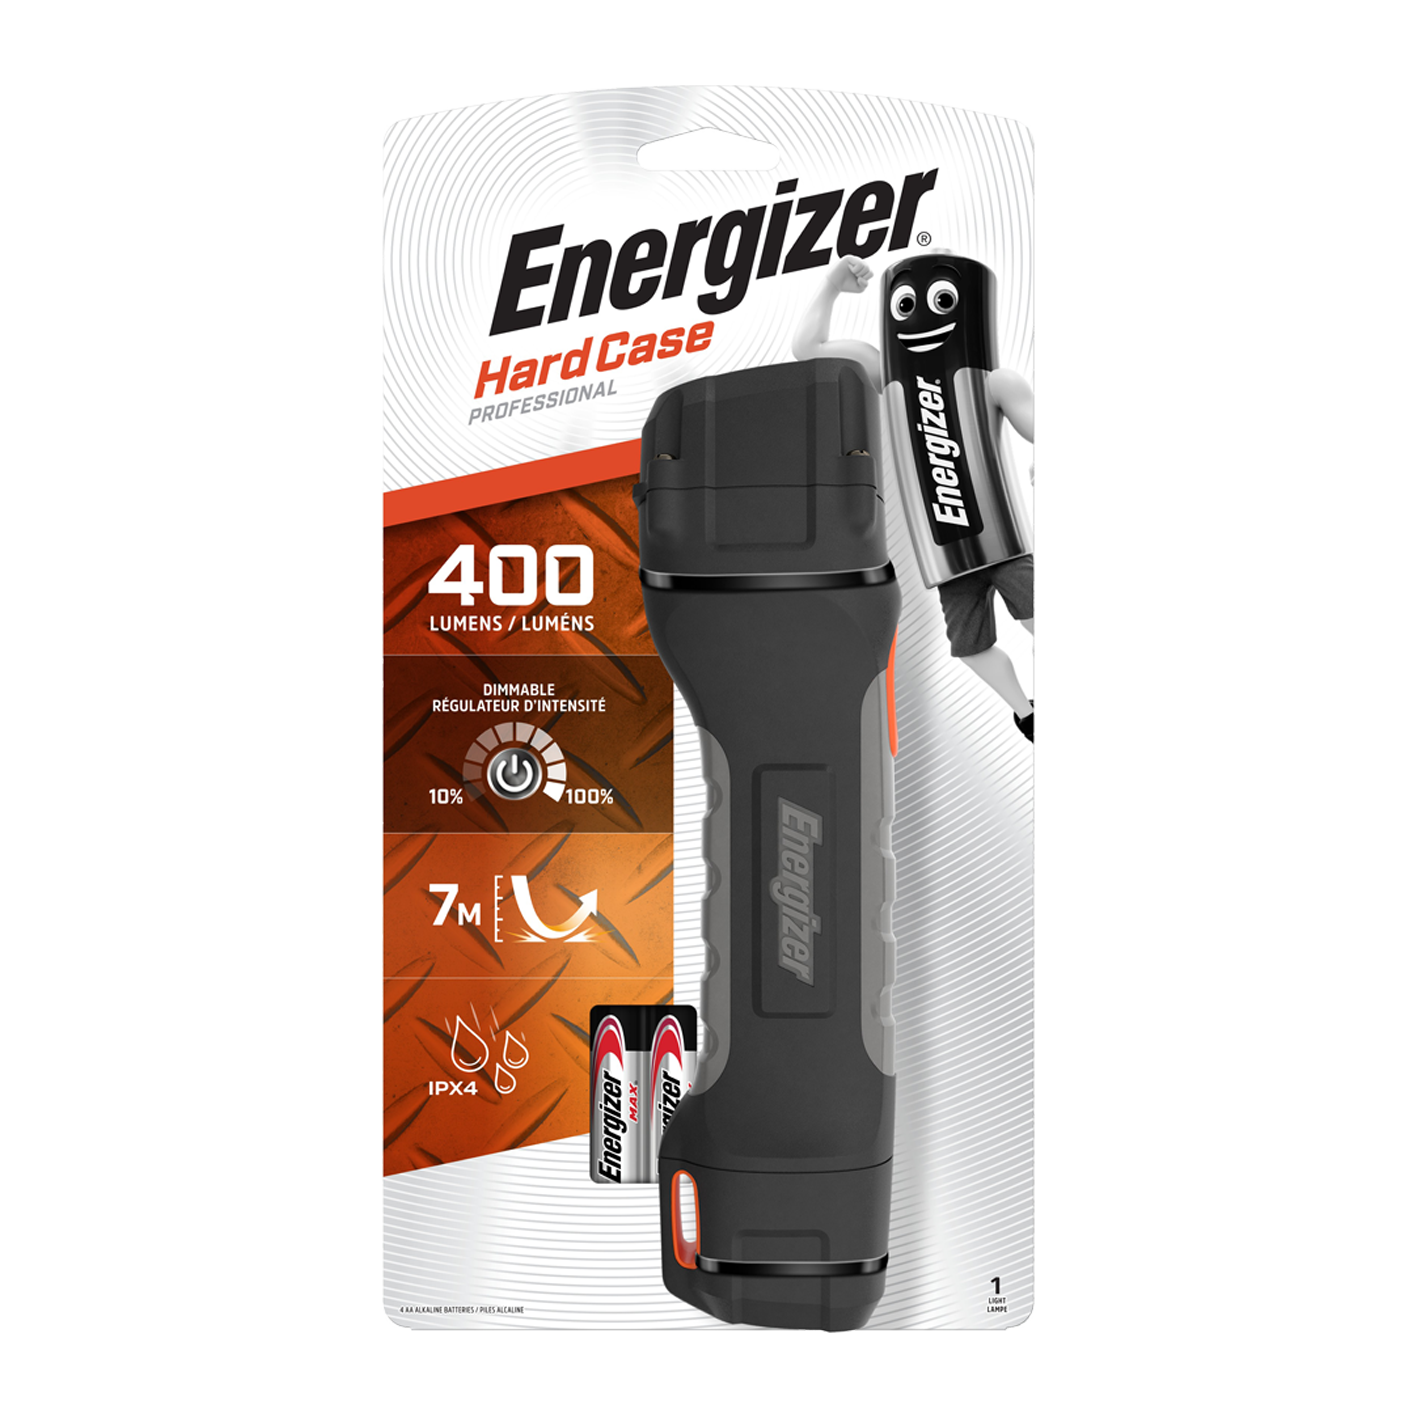 Energizer Hardcase LED 400 Lumen Project Plus Torch With 4 x AA Batteries